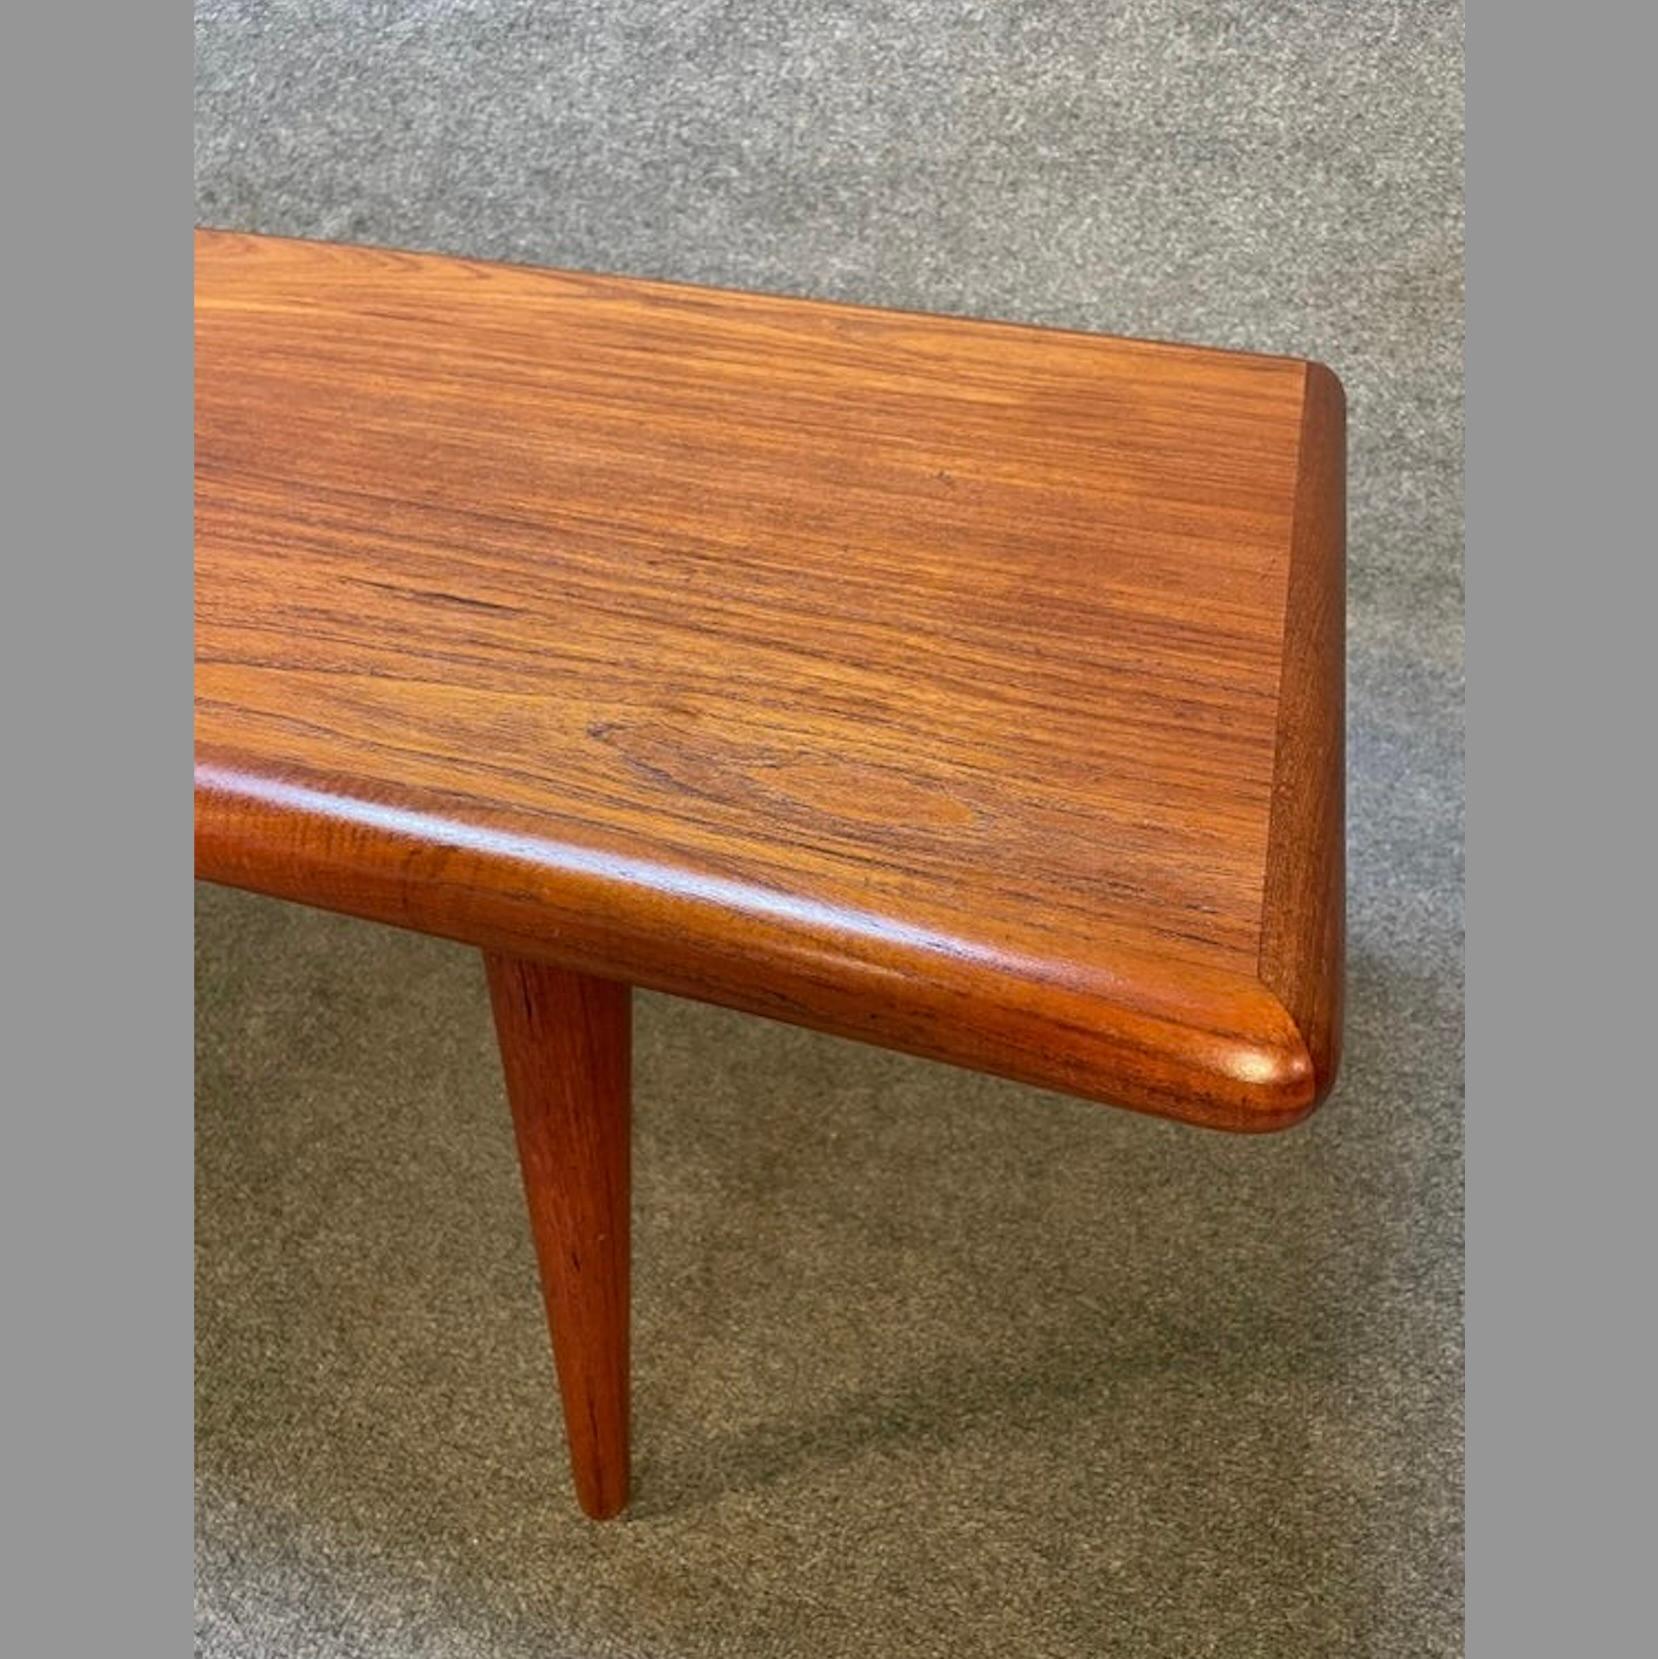 Vintage Danish Mid Century Modern Teak Coffee Table by Jacob Nielsen & Sonner In Good Condition For Sale In San Marcos, CA